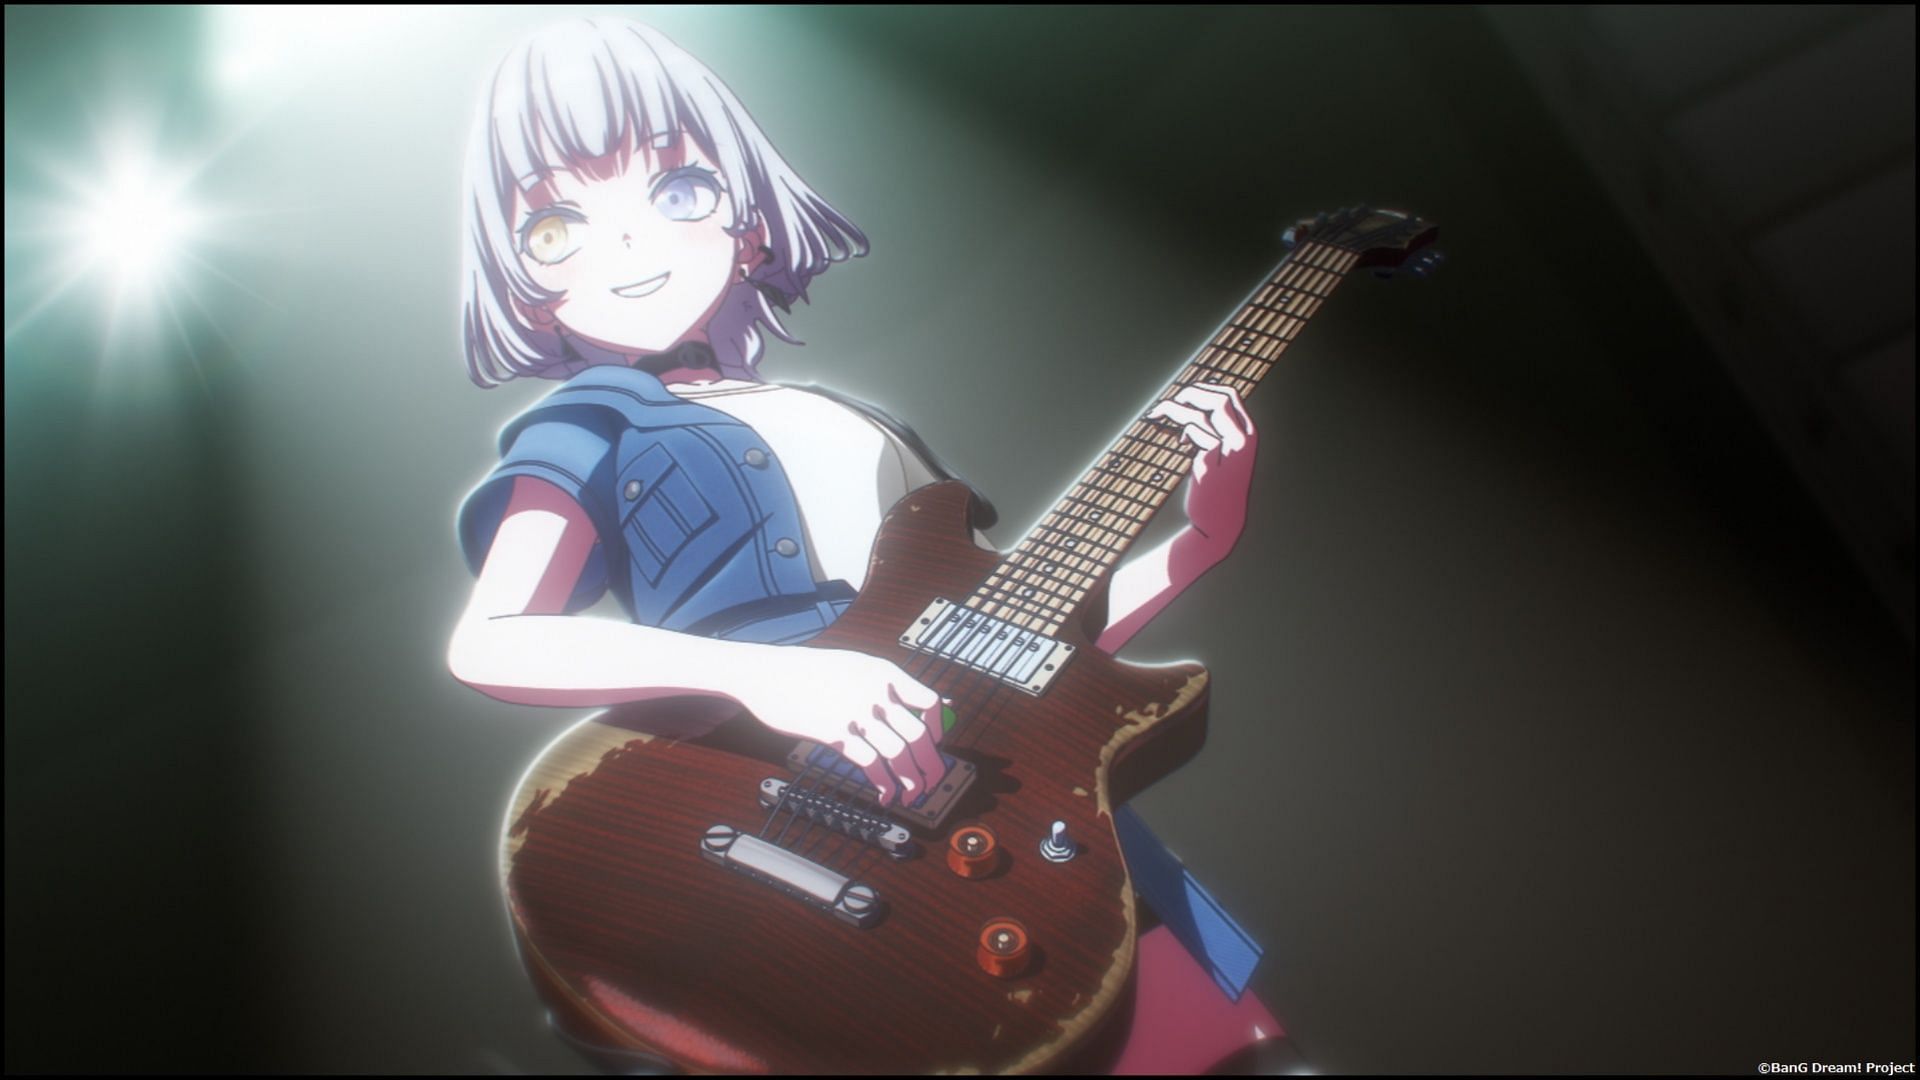 BanG Dream! It's MyGO!!!!! Free-to-Watch on  for a Limited